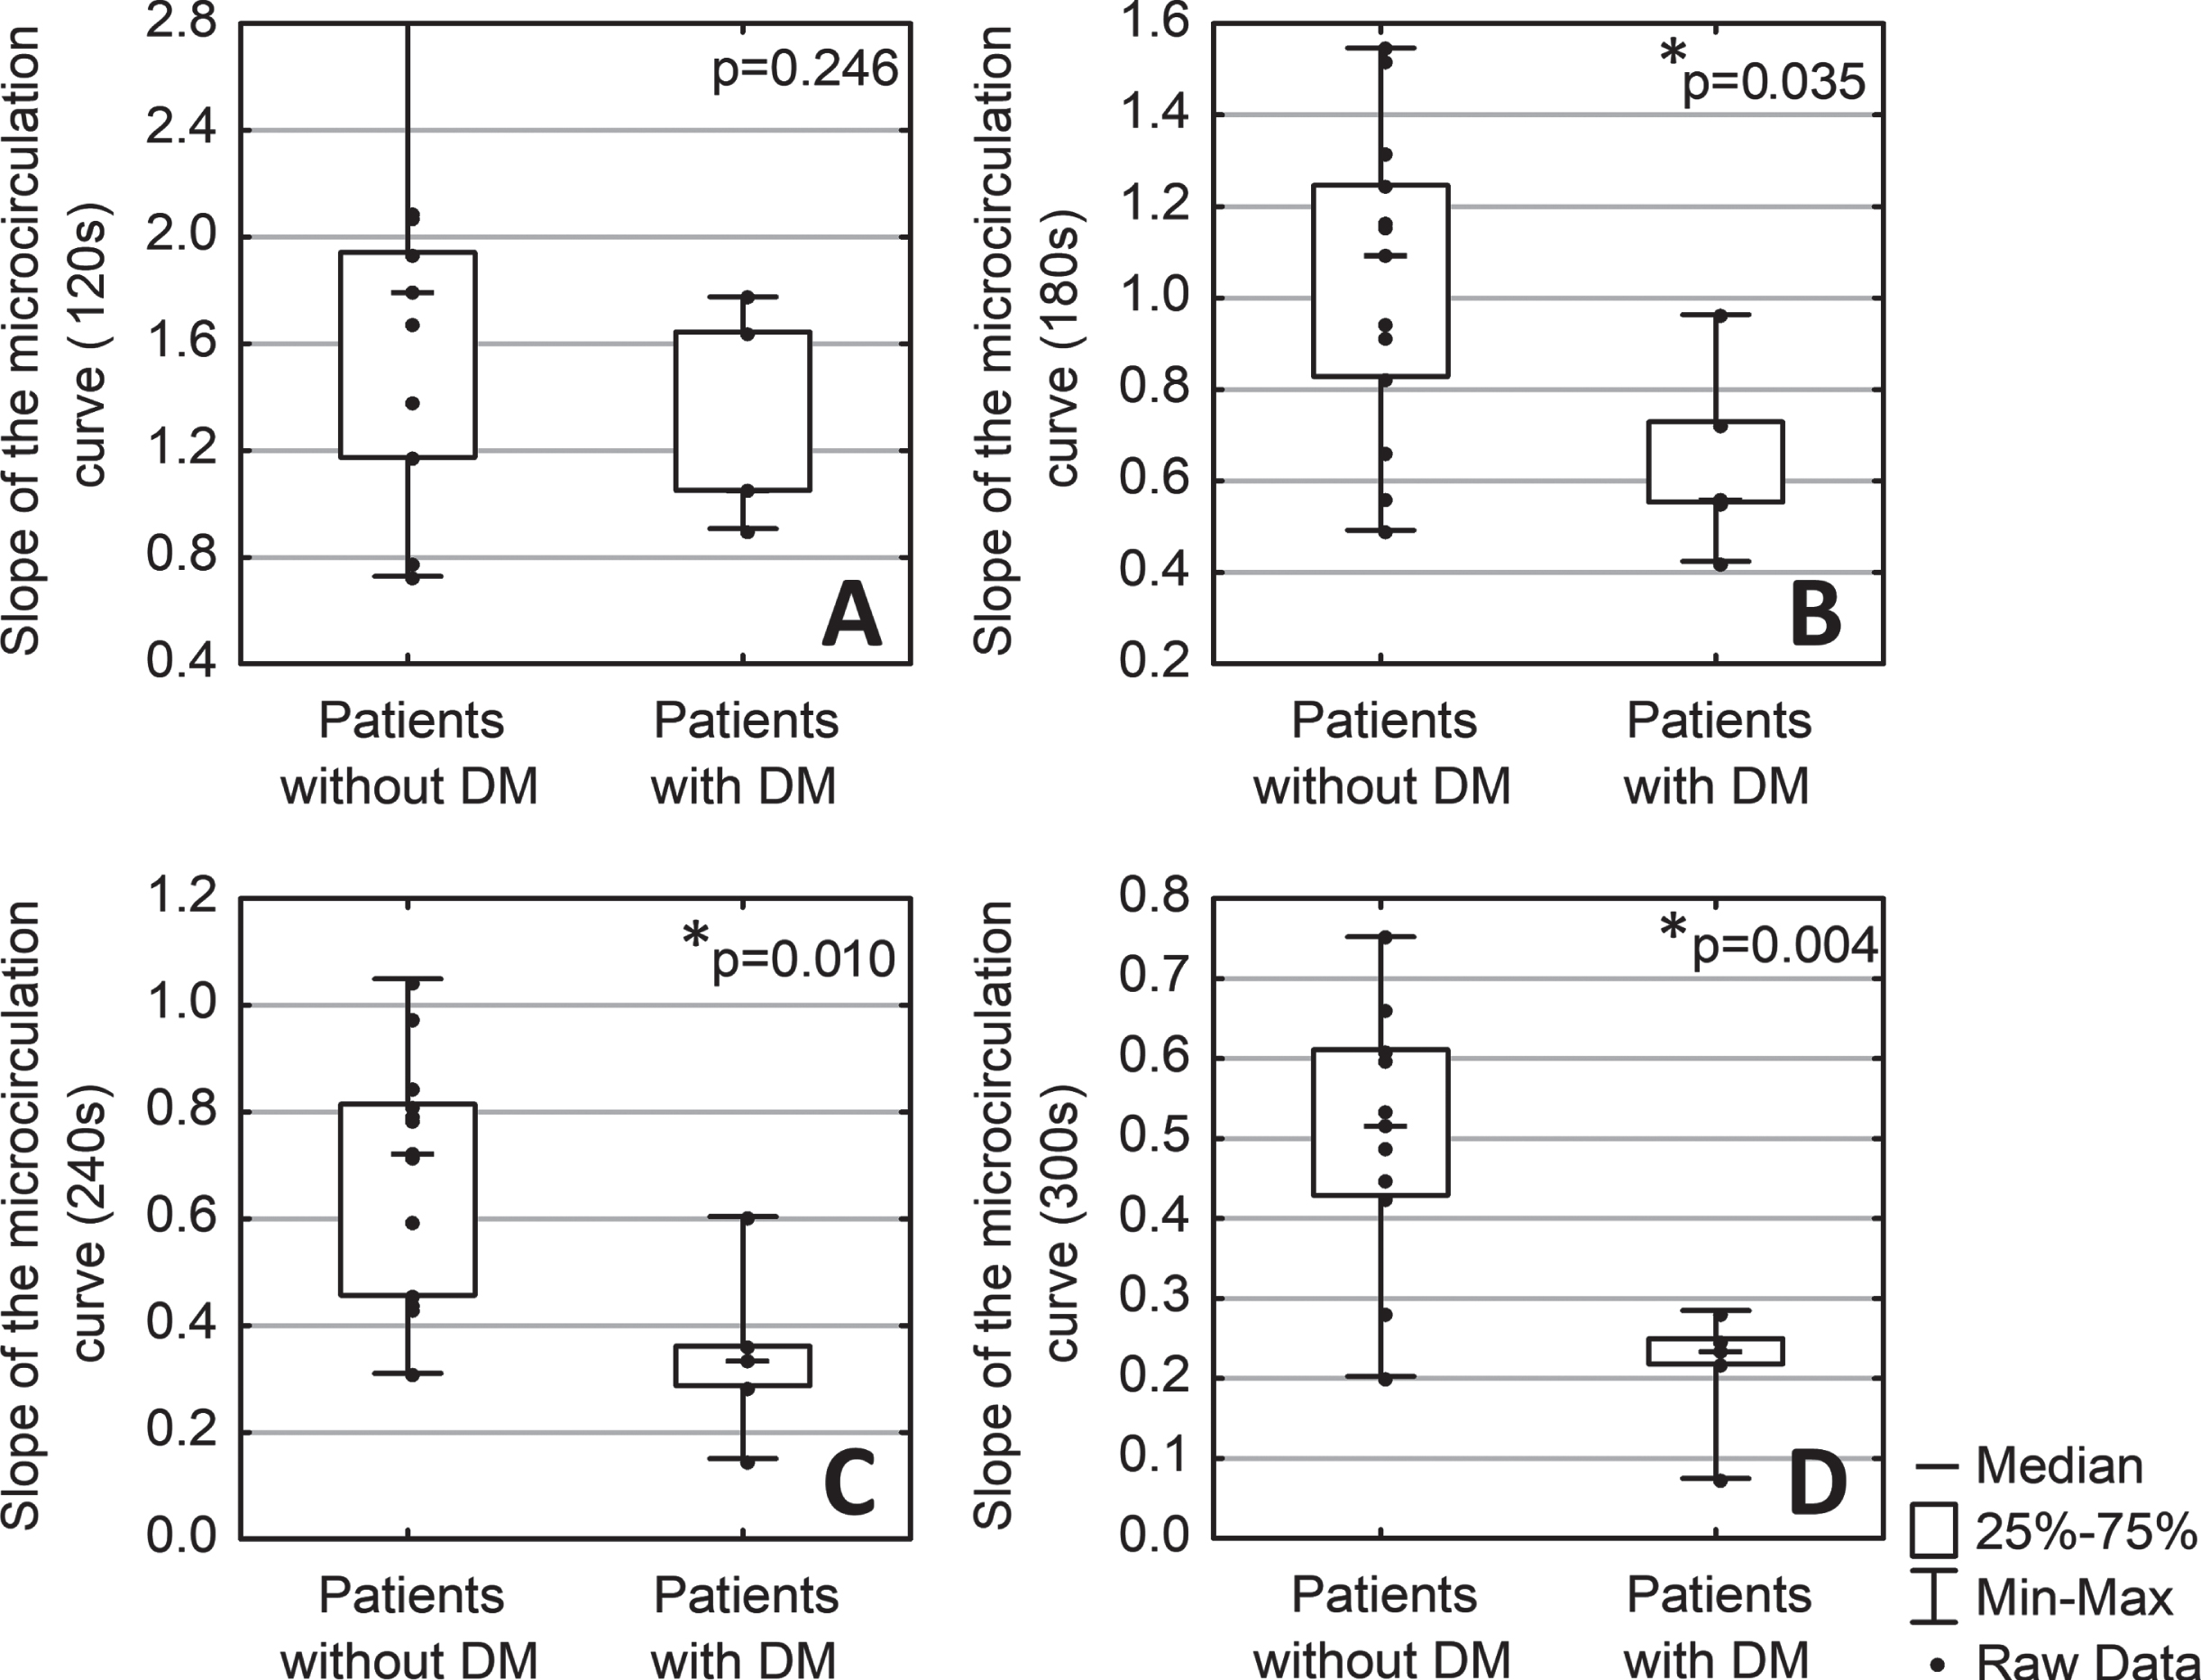 Comparison of the slope of microcirculatory curve sections over 120 (A), 180 (B), 240 (C), and 300 (D) seconds of heating in patients with (n = 5) and without diabetes mellitus (DM) (n = 13). * - p < 0,05 (Mann-Whitney test).